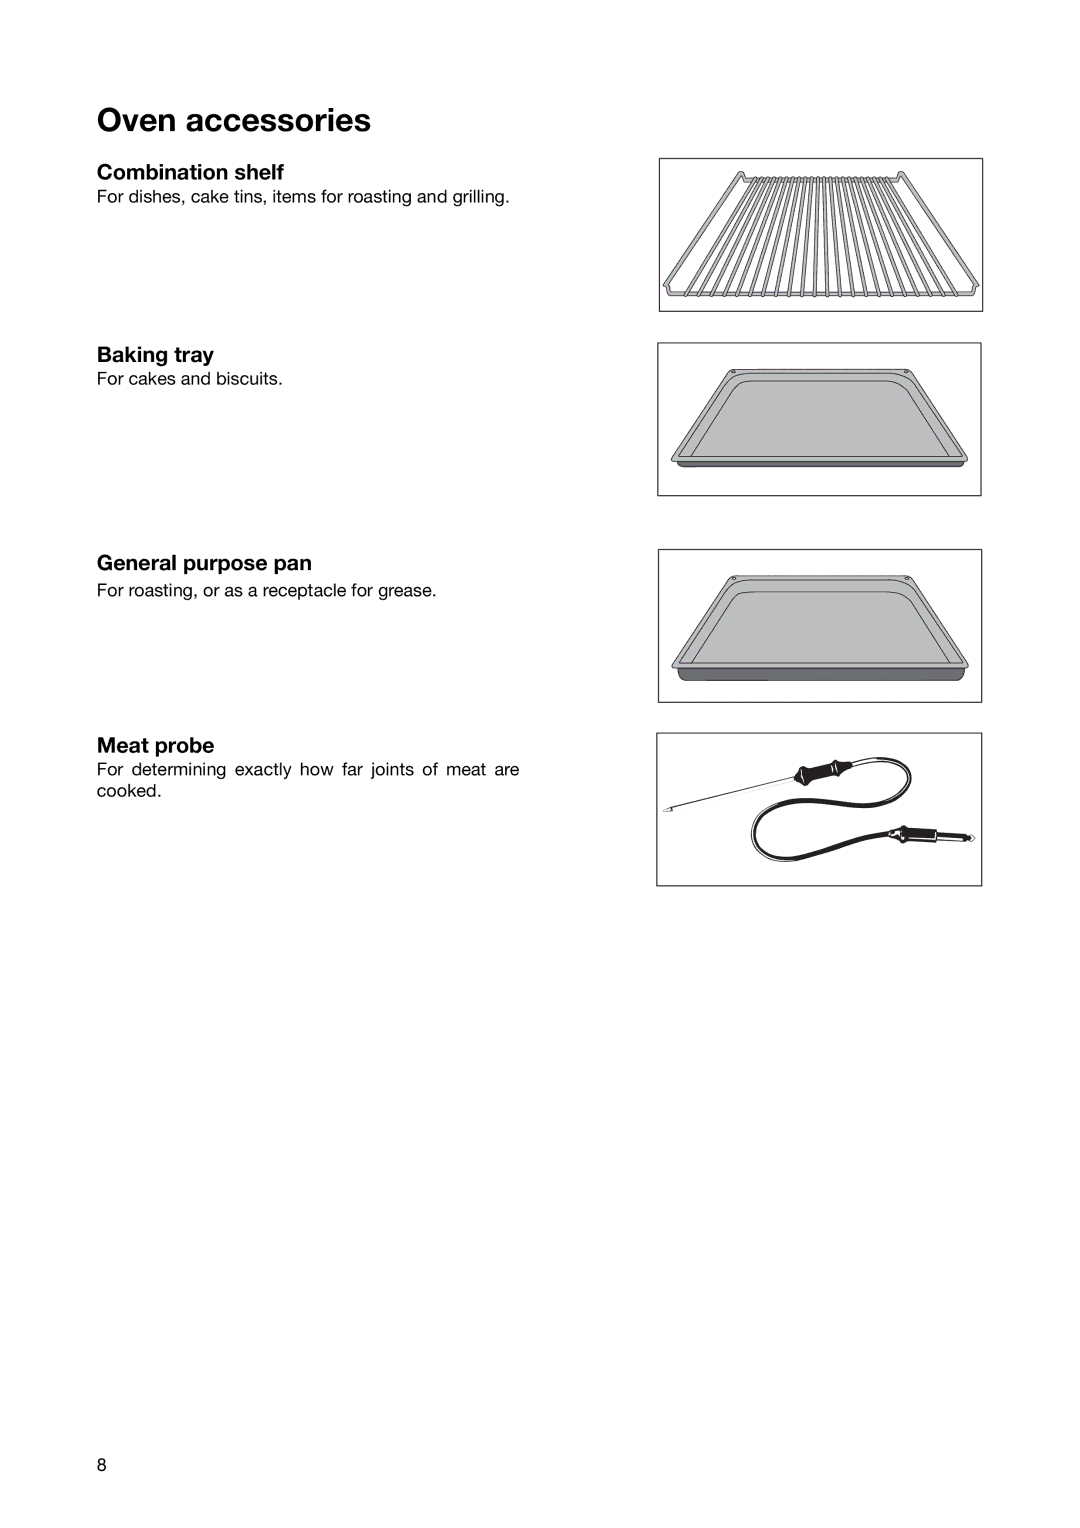 Electrolux EON 6640 manual Oven accessories, Combination shelf, Baking tray, General purpose pan, Meat probe 